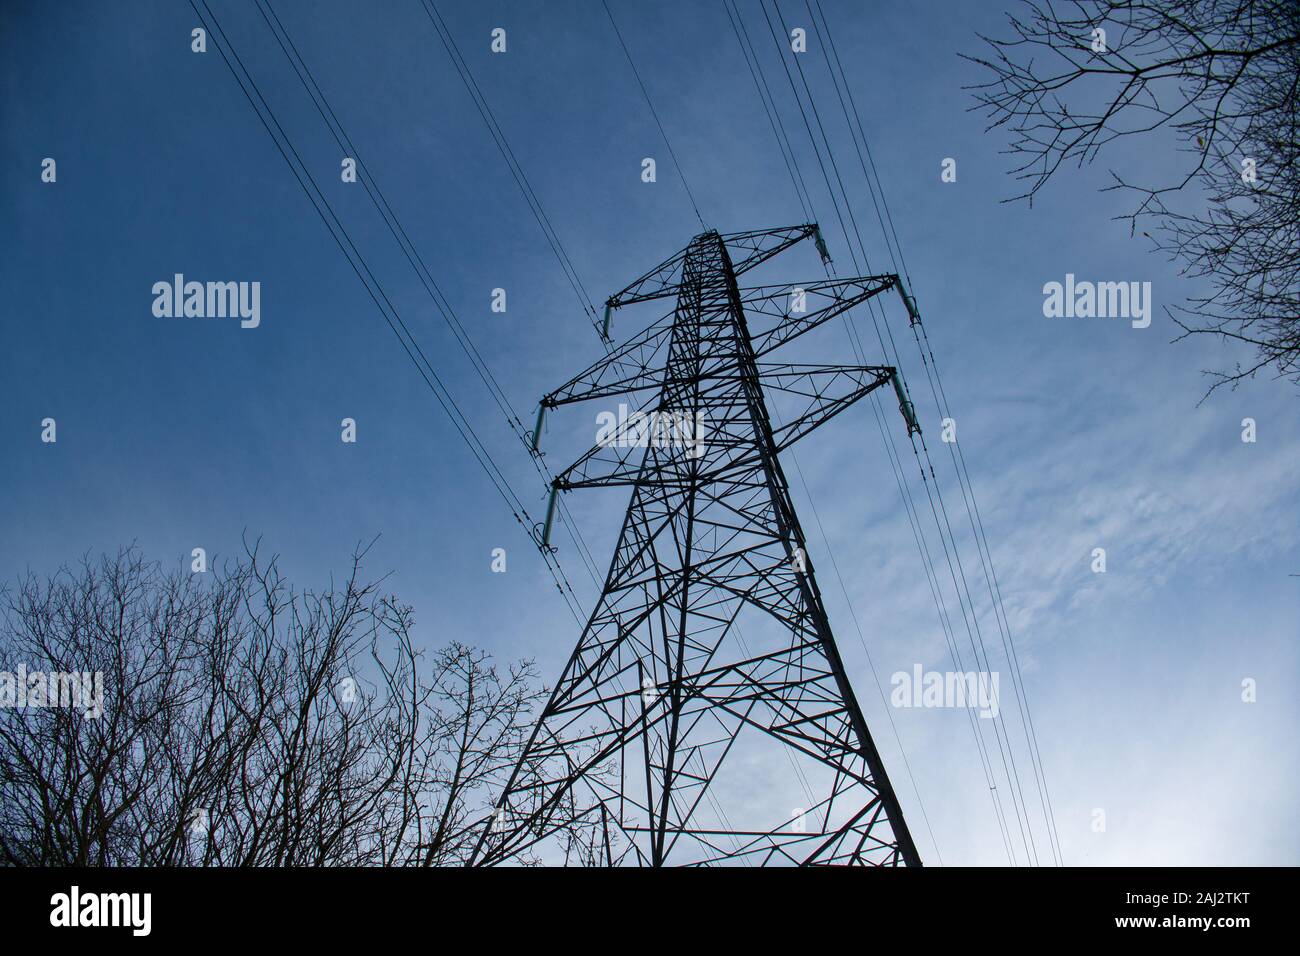 A high voltage electricity transmission pylon in winter - part of the national grid for the distribution of power by overhead cables in the UK. Stock Photo